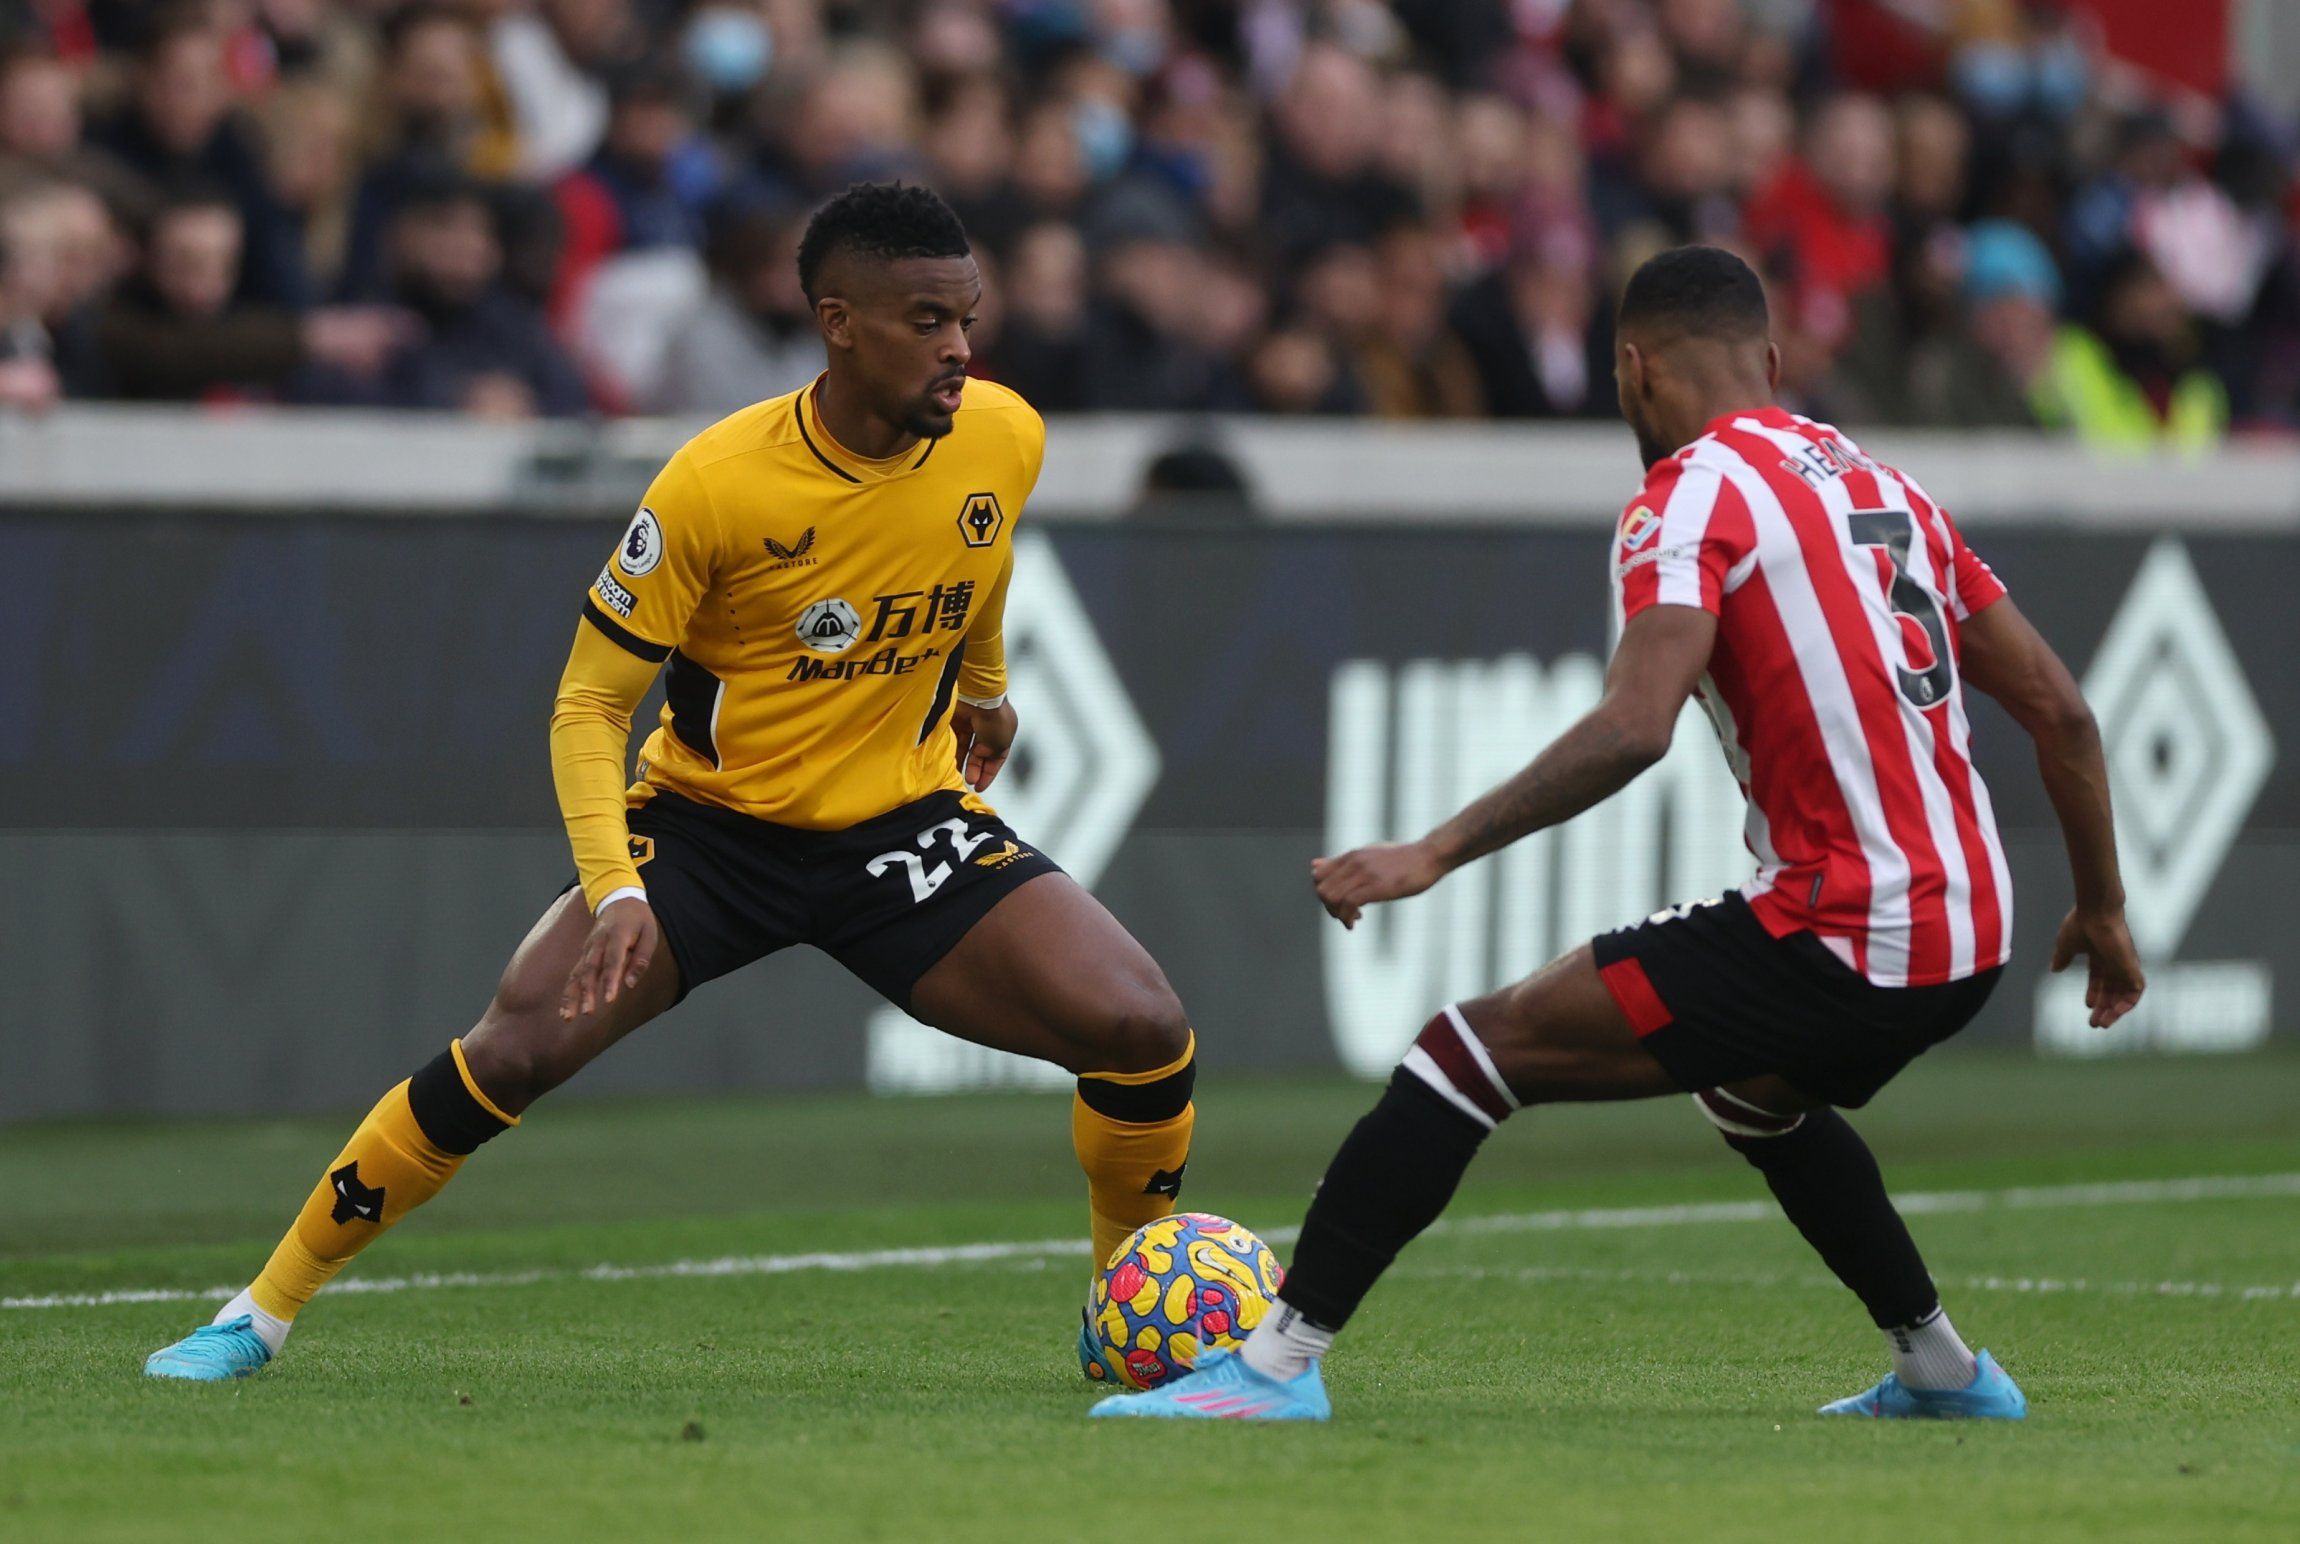 Bruno Lage, Fosun, Jeff Shi, Molineux, The Old Gold, Wolves, Wolves fans, Wolves info, Wolves latest, Wolves news, Wolves updates, WWFC, WWFC news, WWFC update, Premier League, Premier League news, Wolverhampton Wanderers, Nelson Semedo, Market Movers, Barcelona, 
